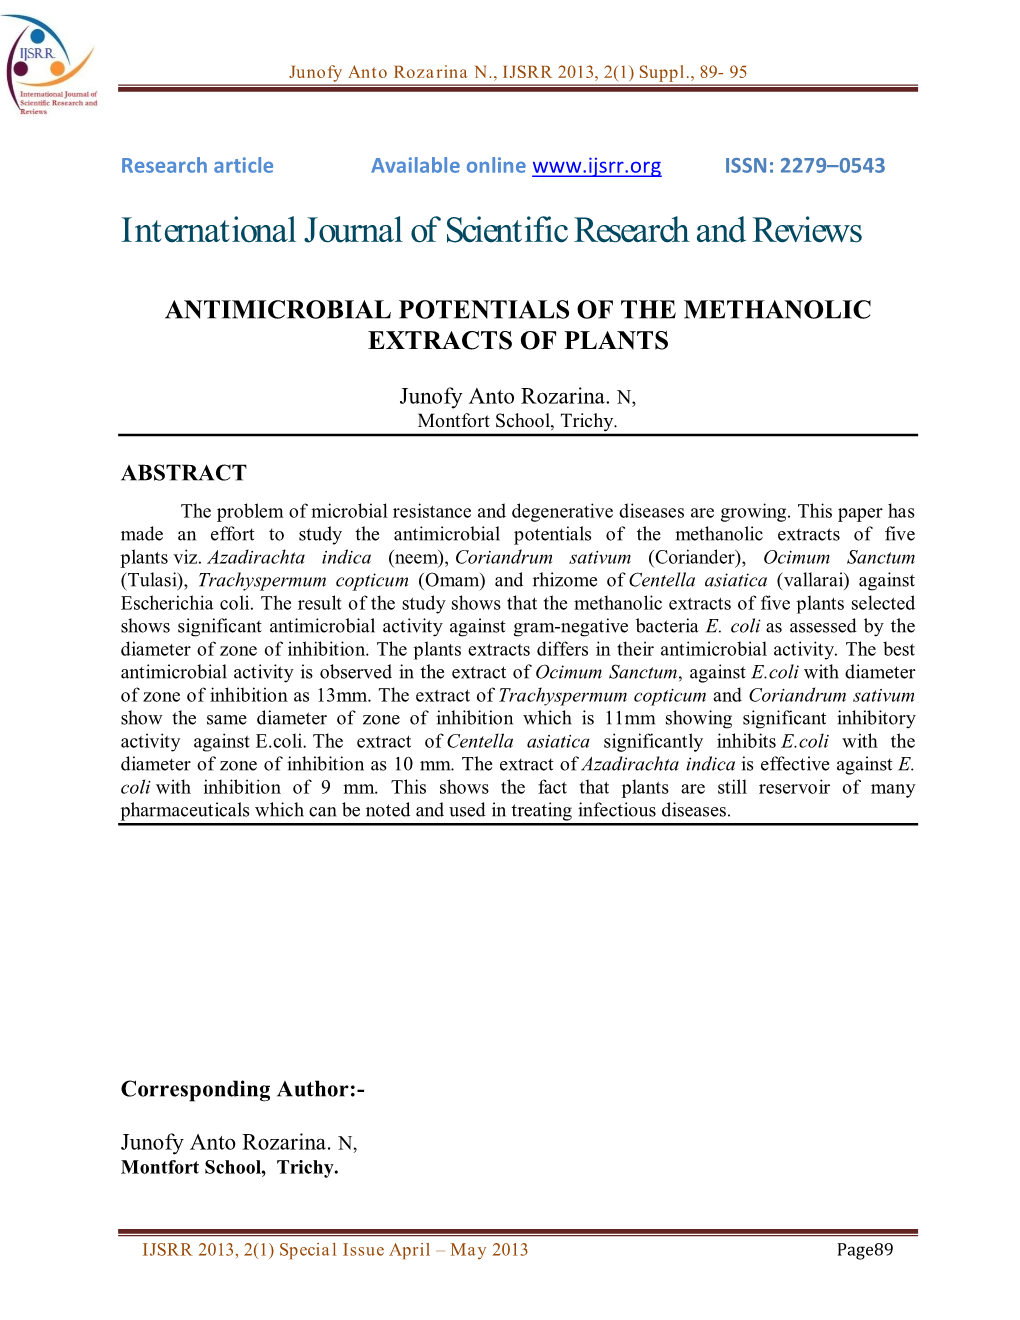 Antimicrobial Potentials of the Methanolic Extracts of Plants